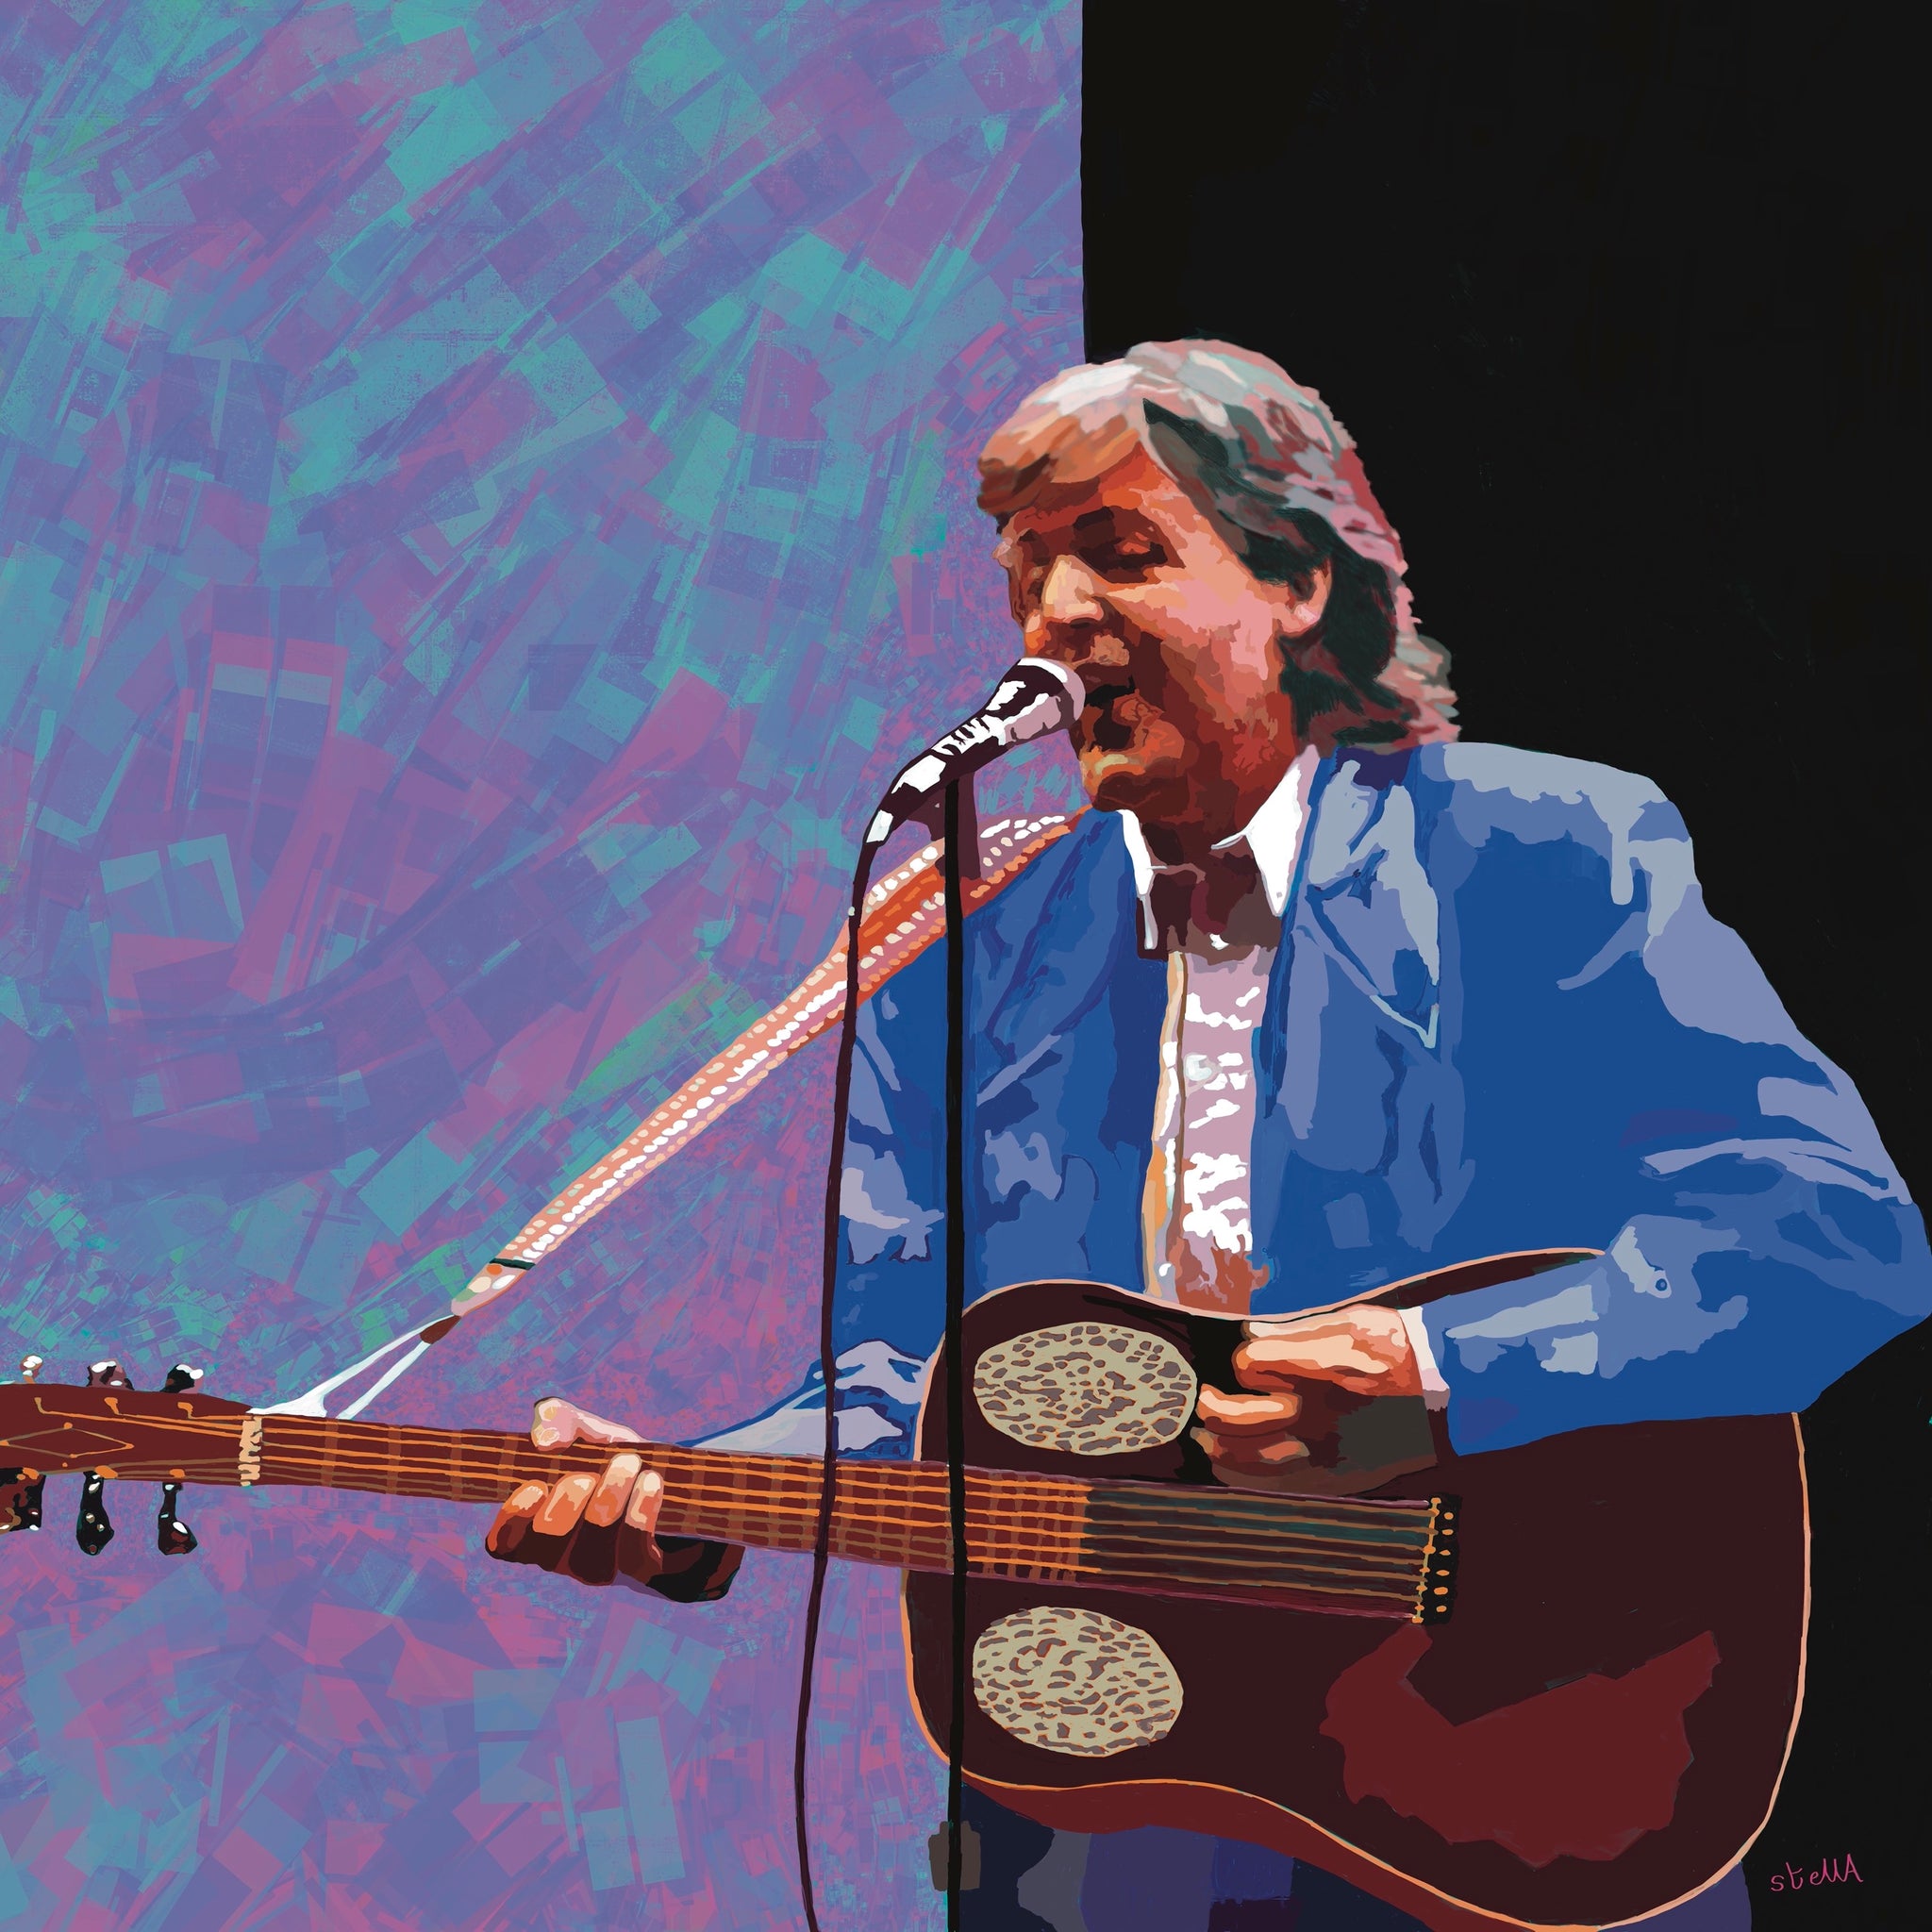 Digital painting of Paul McCartney playing bass by Stella Tooth musician artist